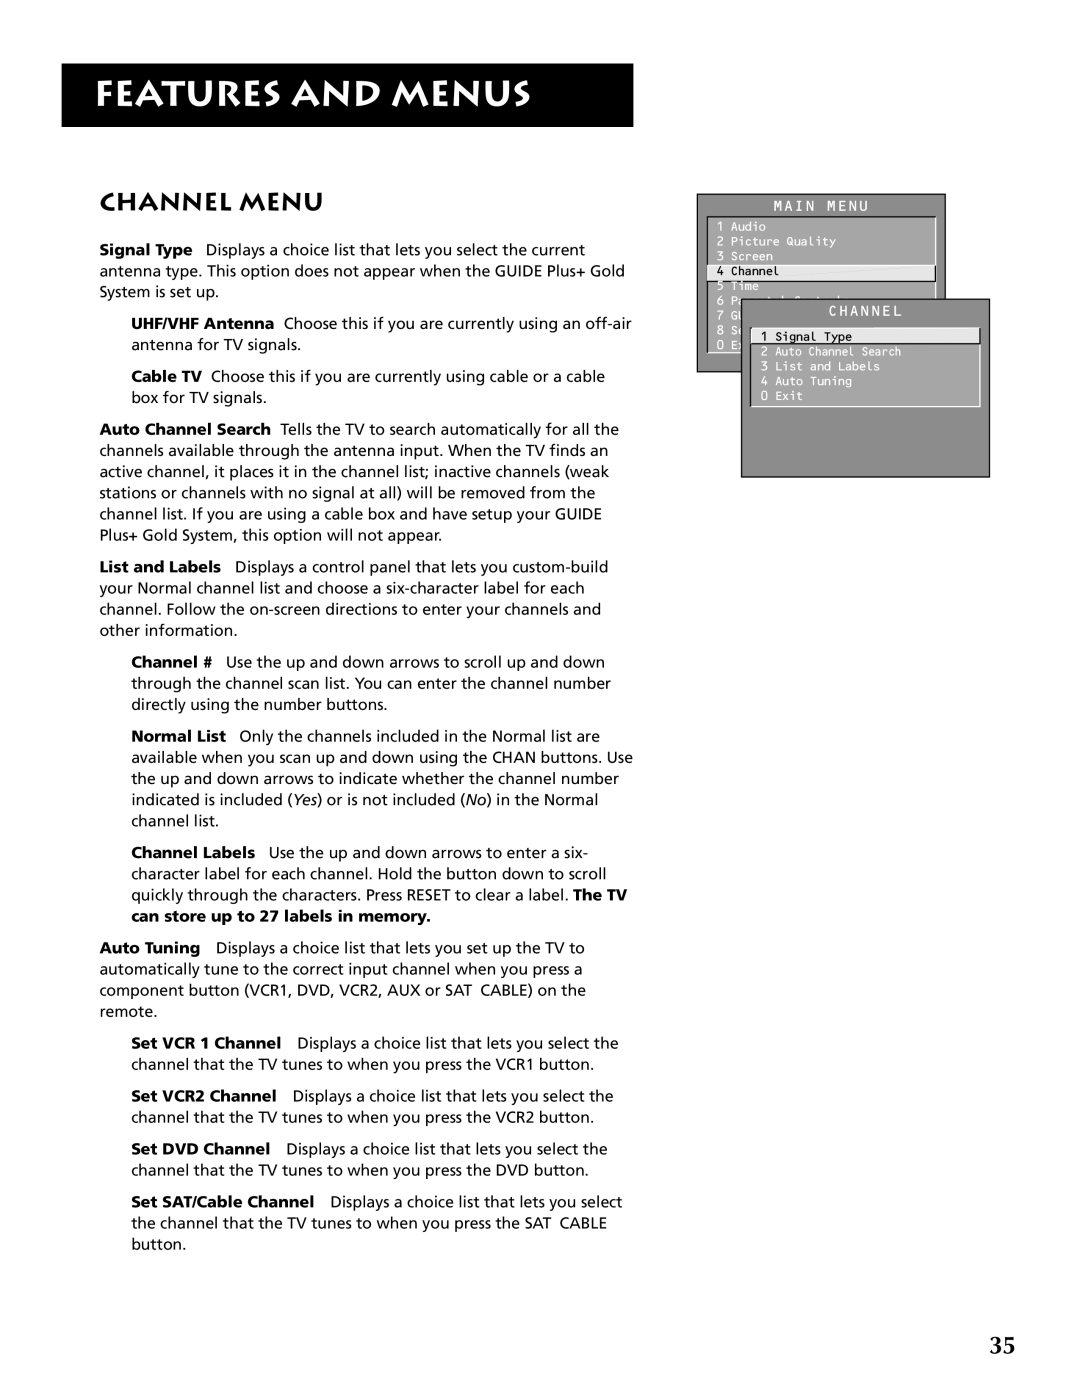 RCA F32691 manual Channel Menu, Features And Menus, can store up to 27 labels in memory 